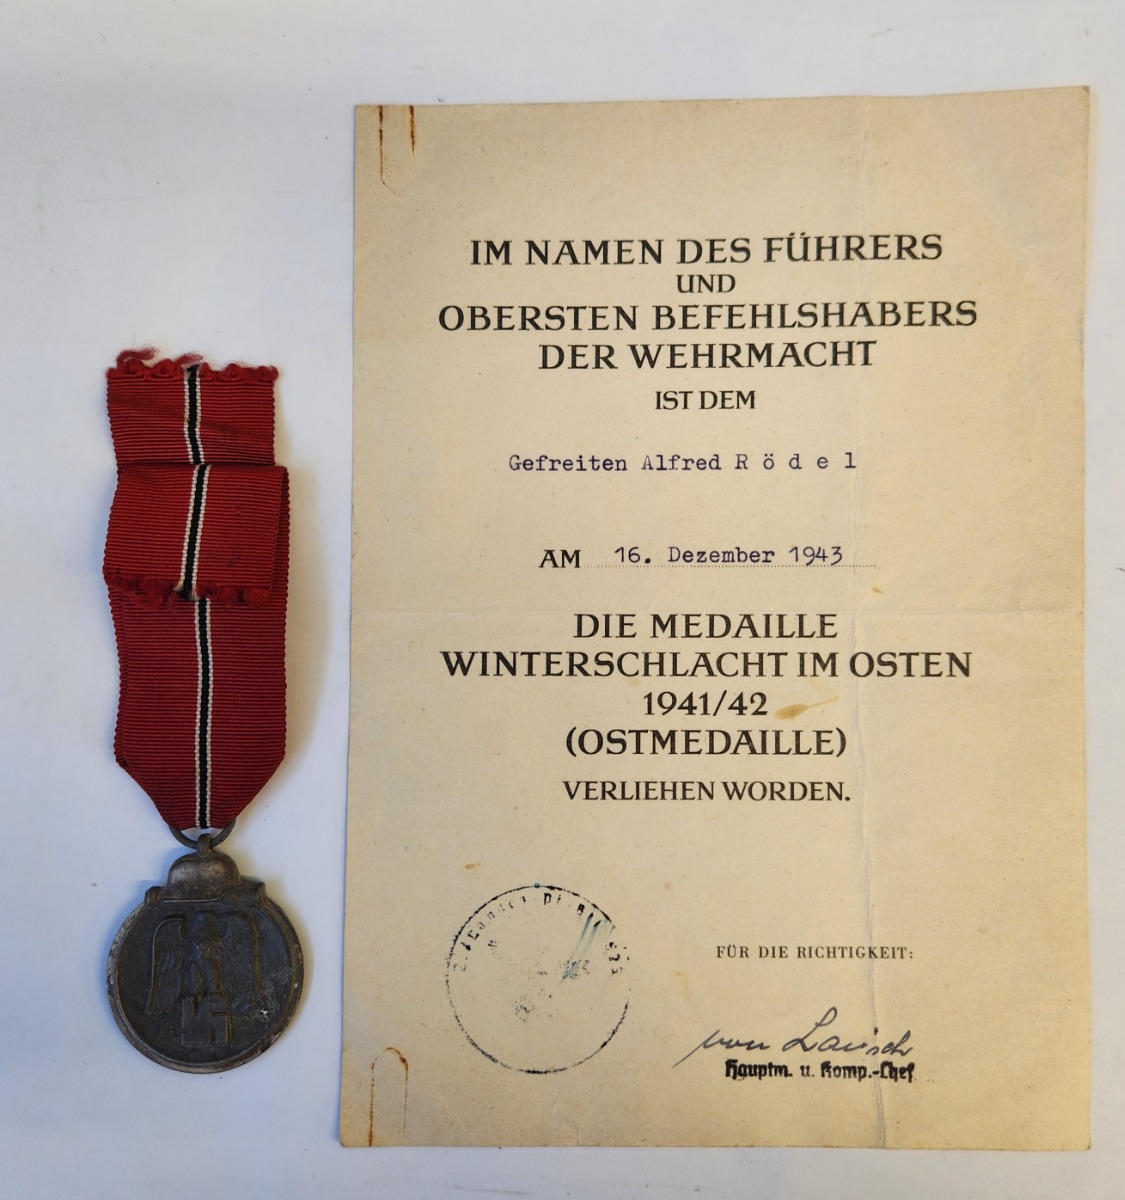 GERMAN OPERATION BARBAROSSA WW11 EASTERN FRONT MEDAL WITH AWARD DOCUMENT TO OBERGEFREITEN HERMANN SENGHAS